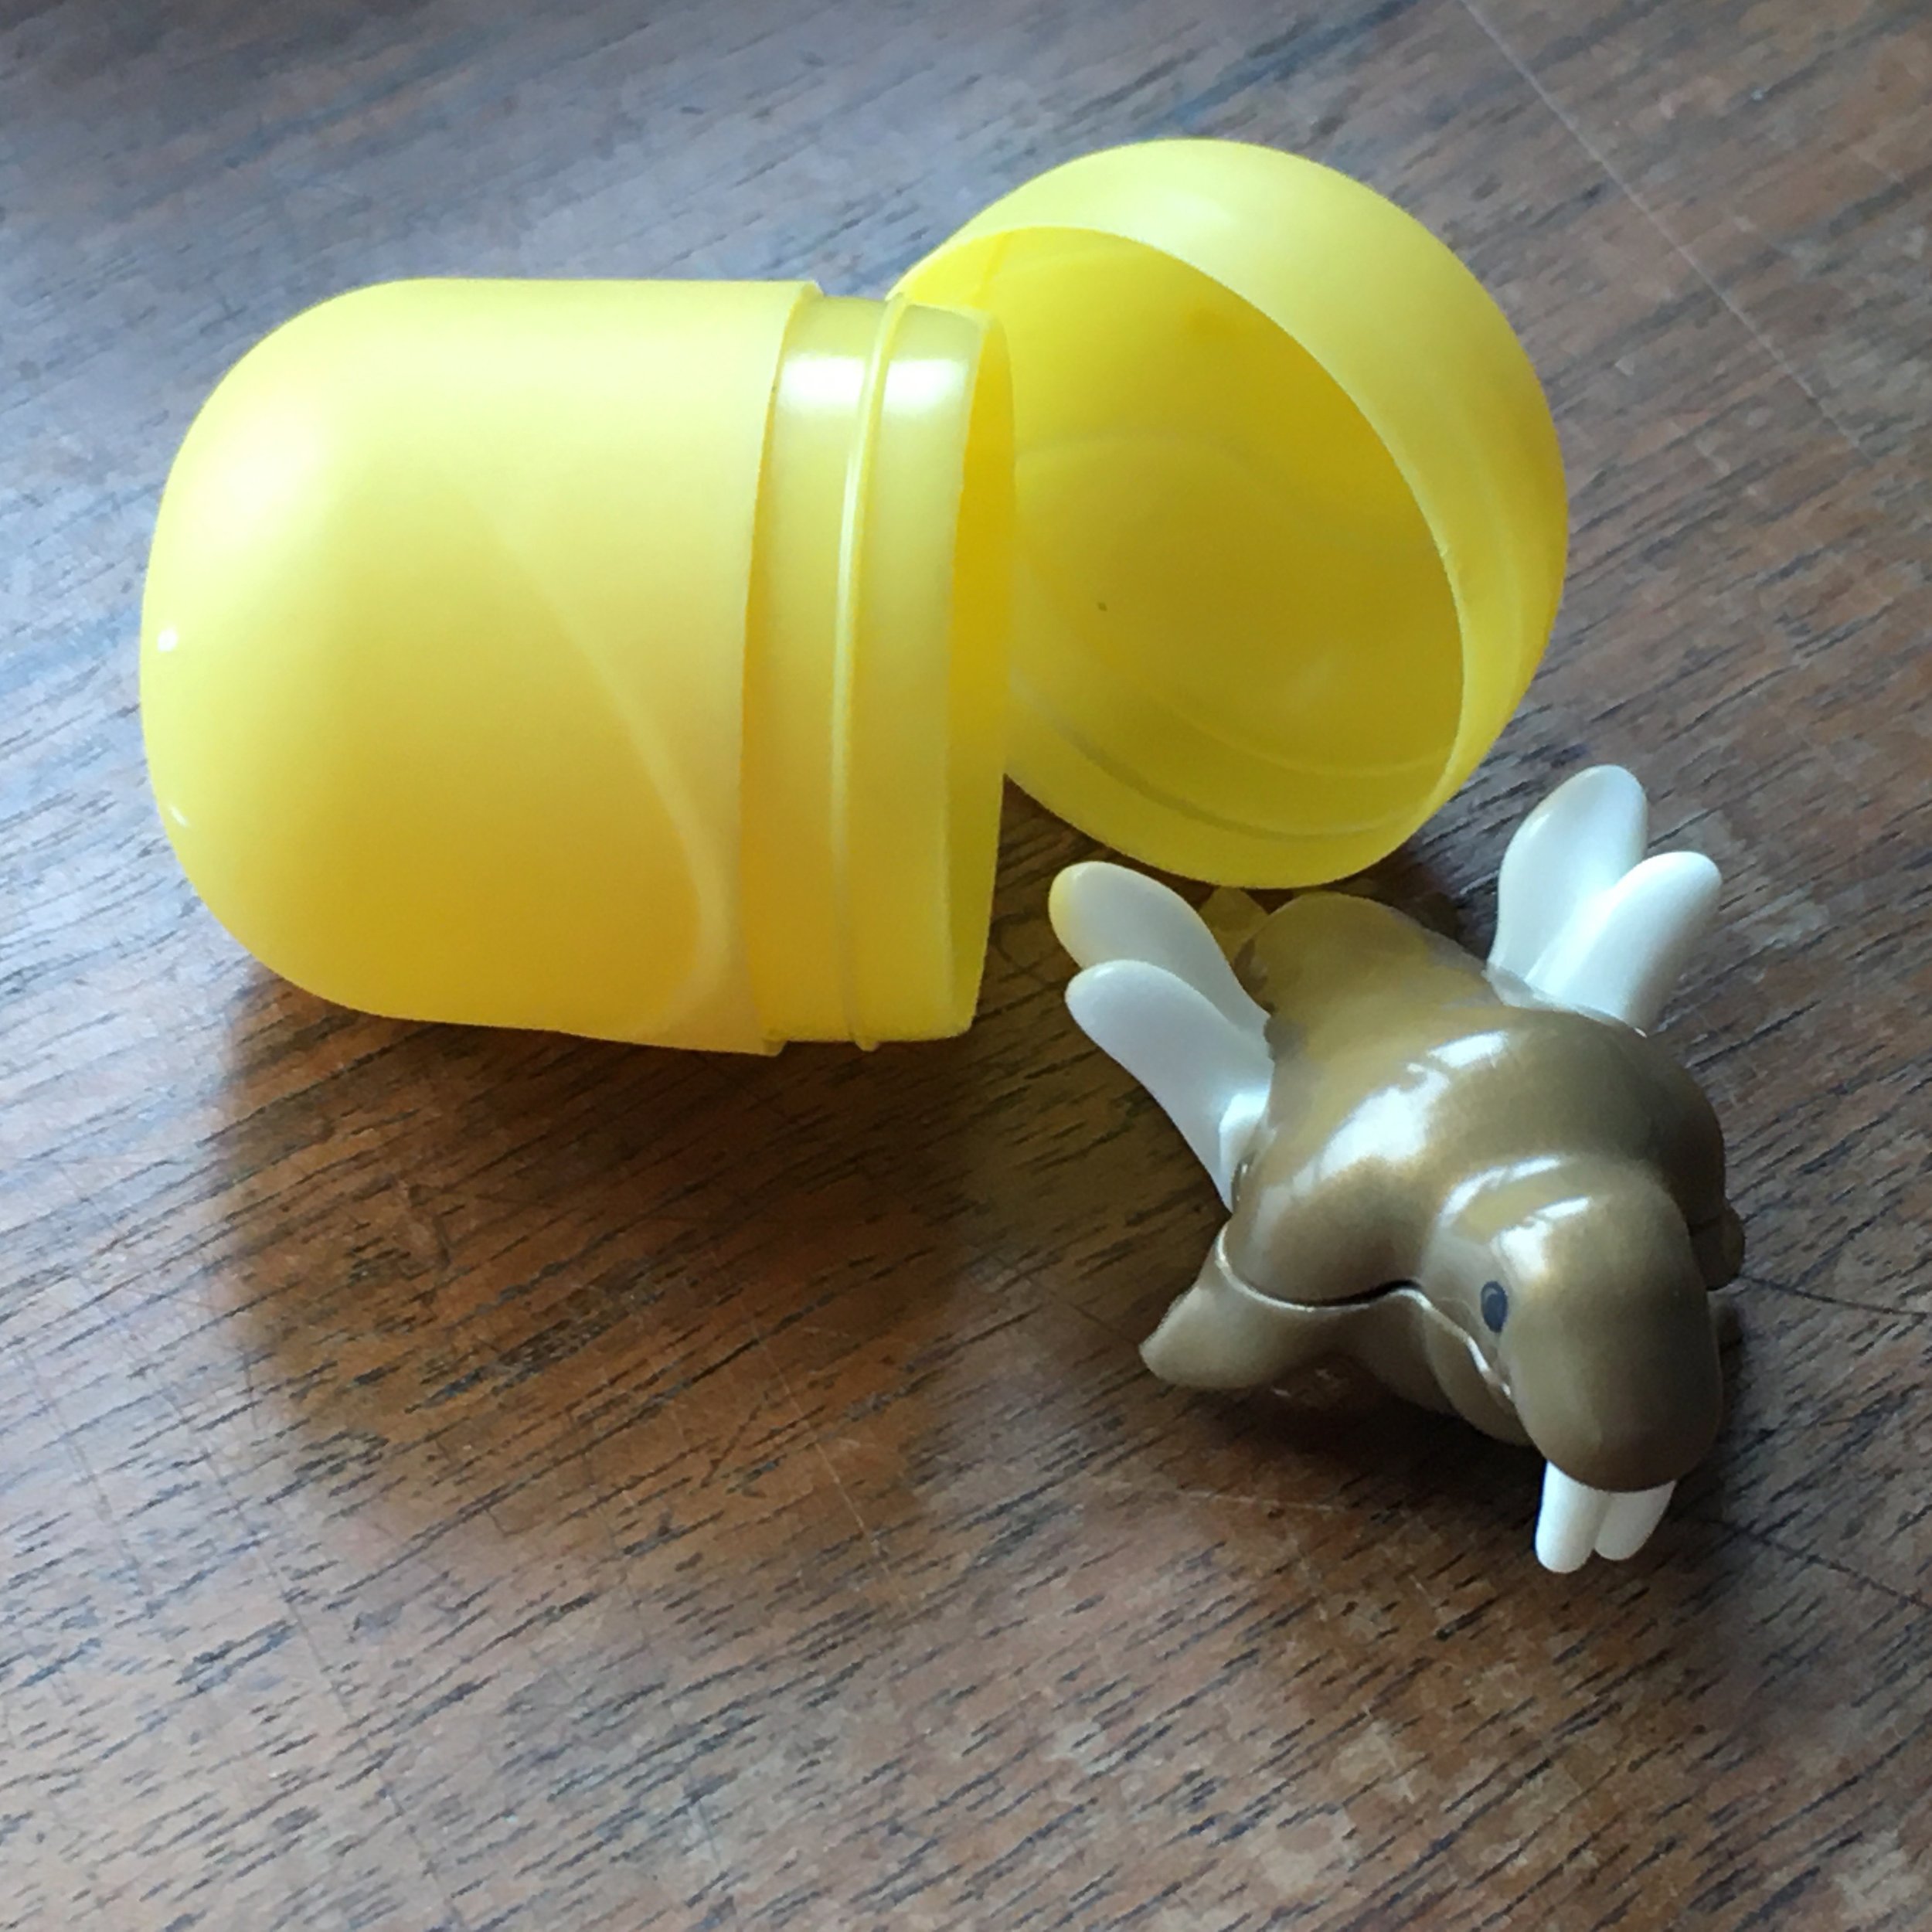  the yolk capsule open, hatching a plastic toy walrus with wings 